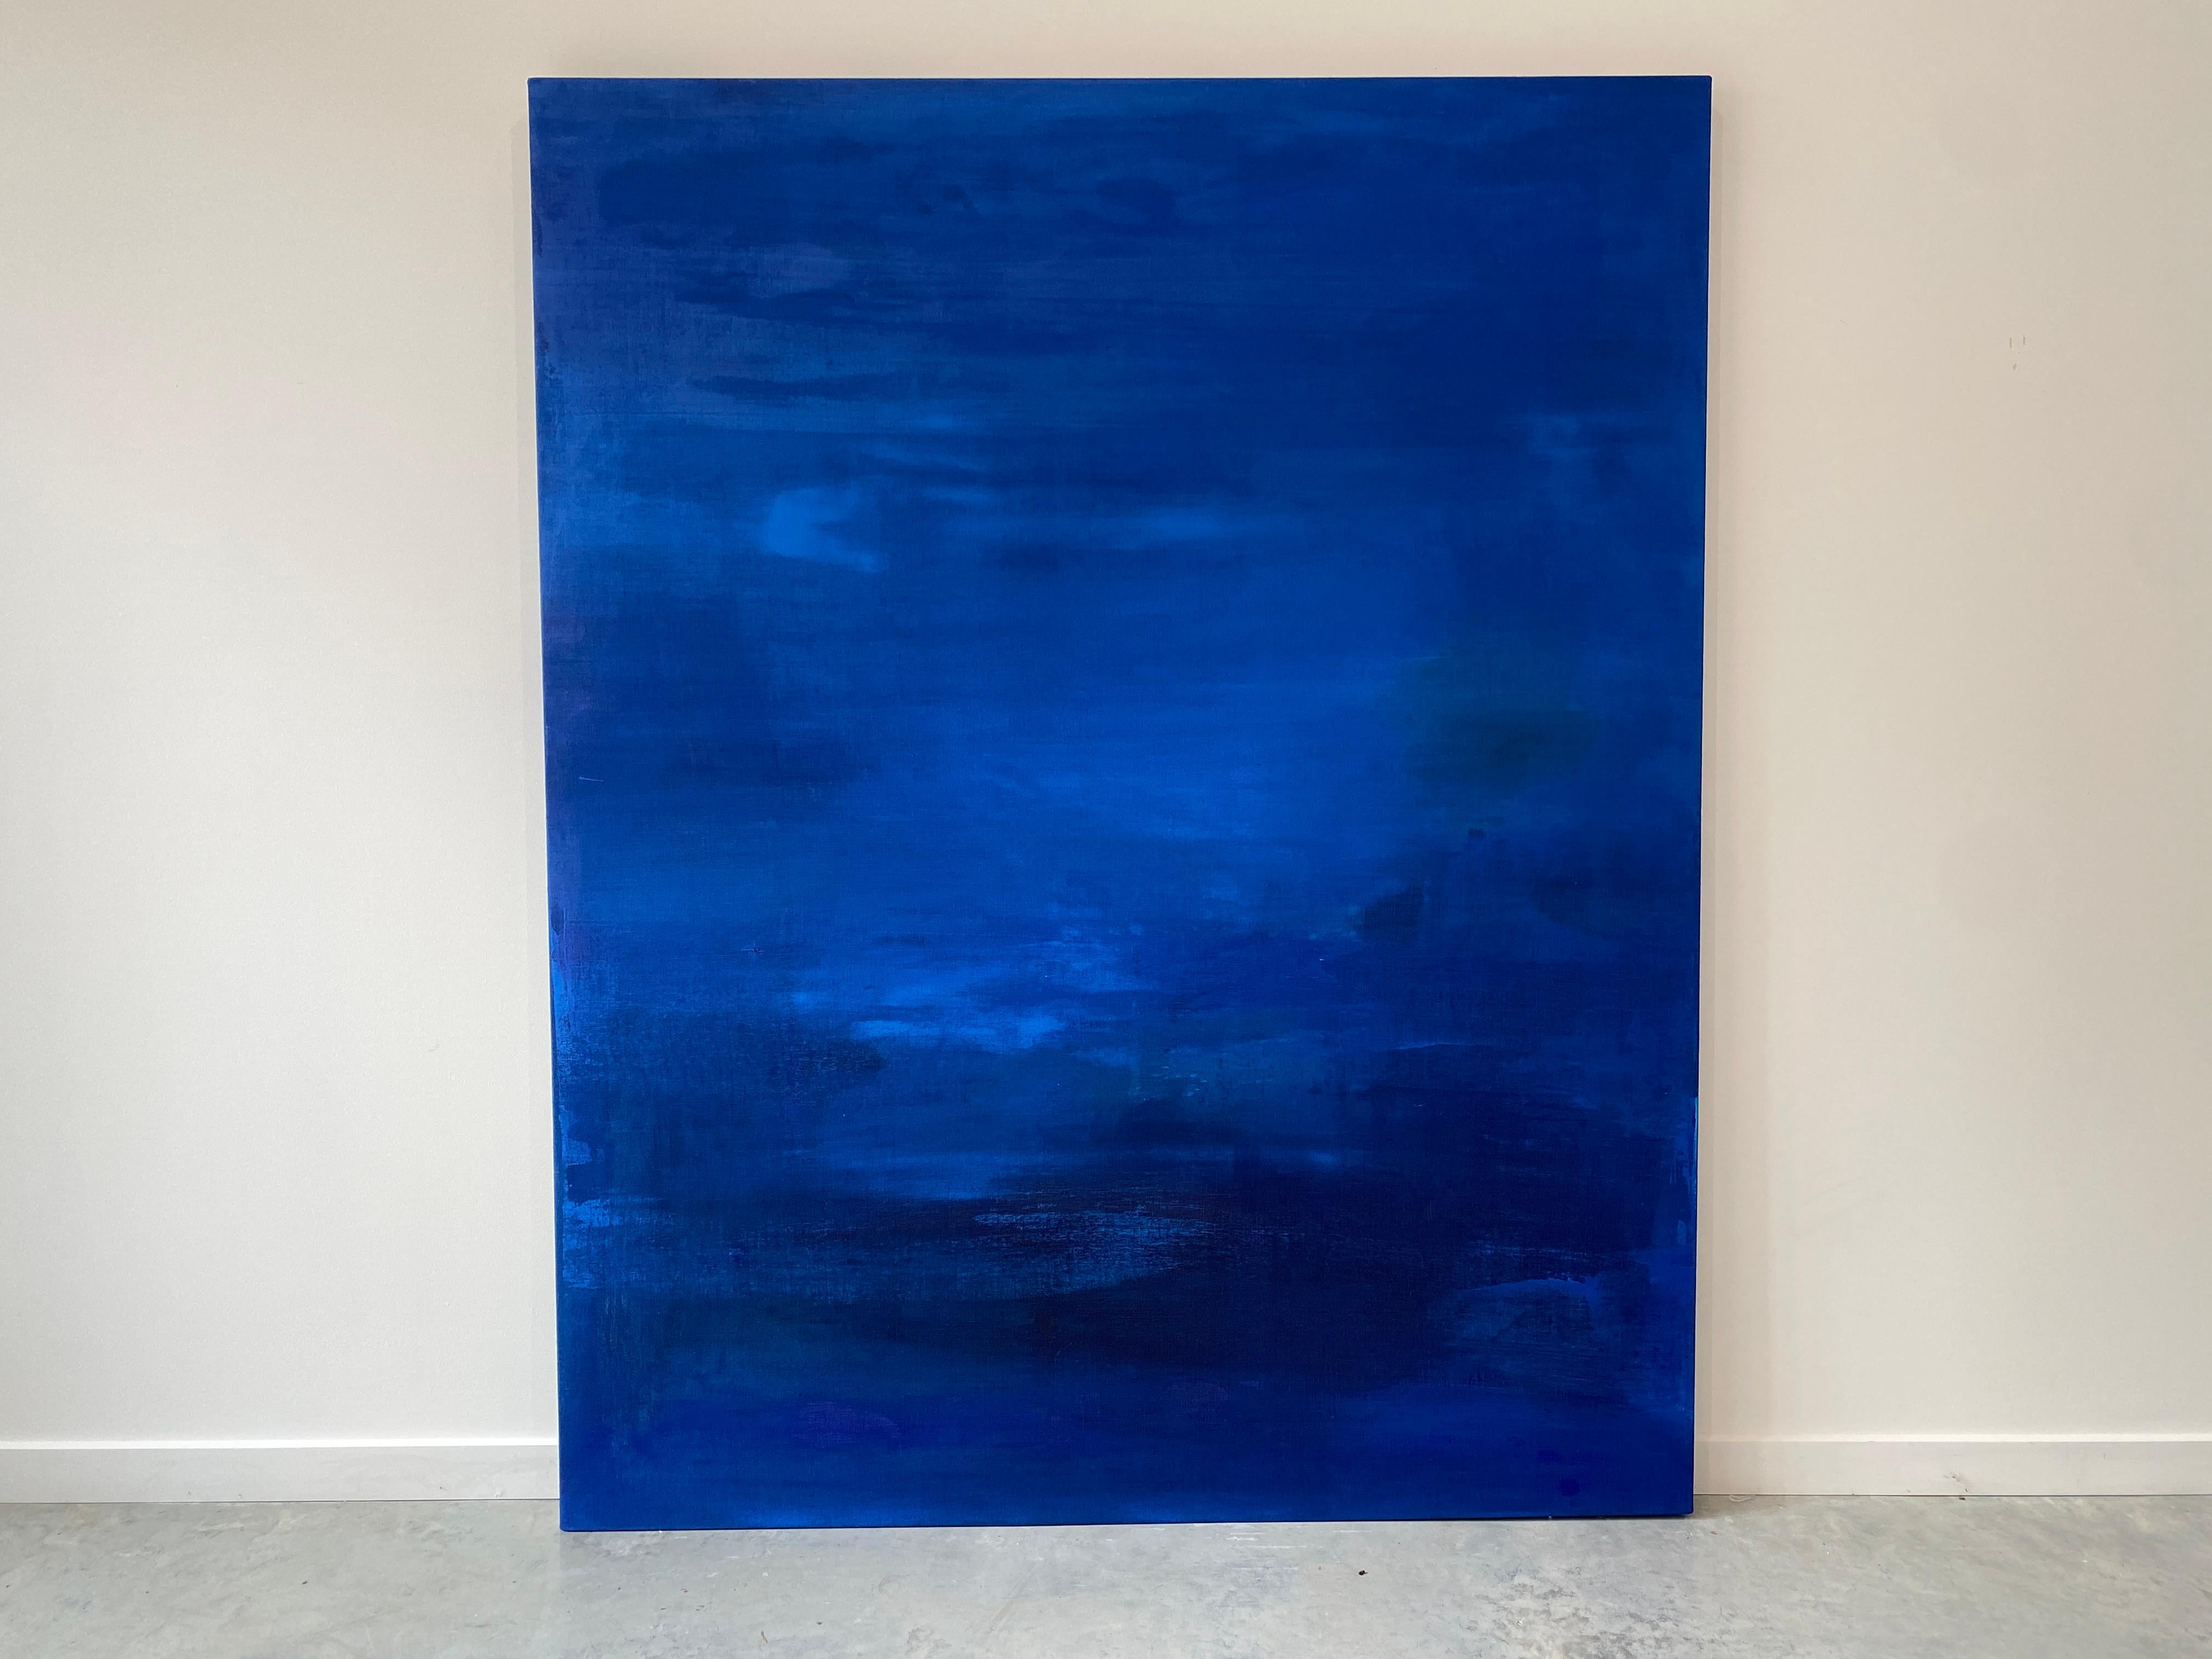 Big Blue cobalt large scale minimalist abstract painting statement artwork For Sale 2